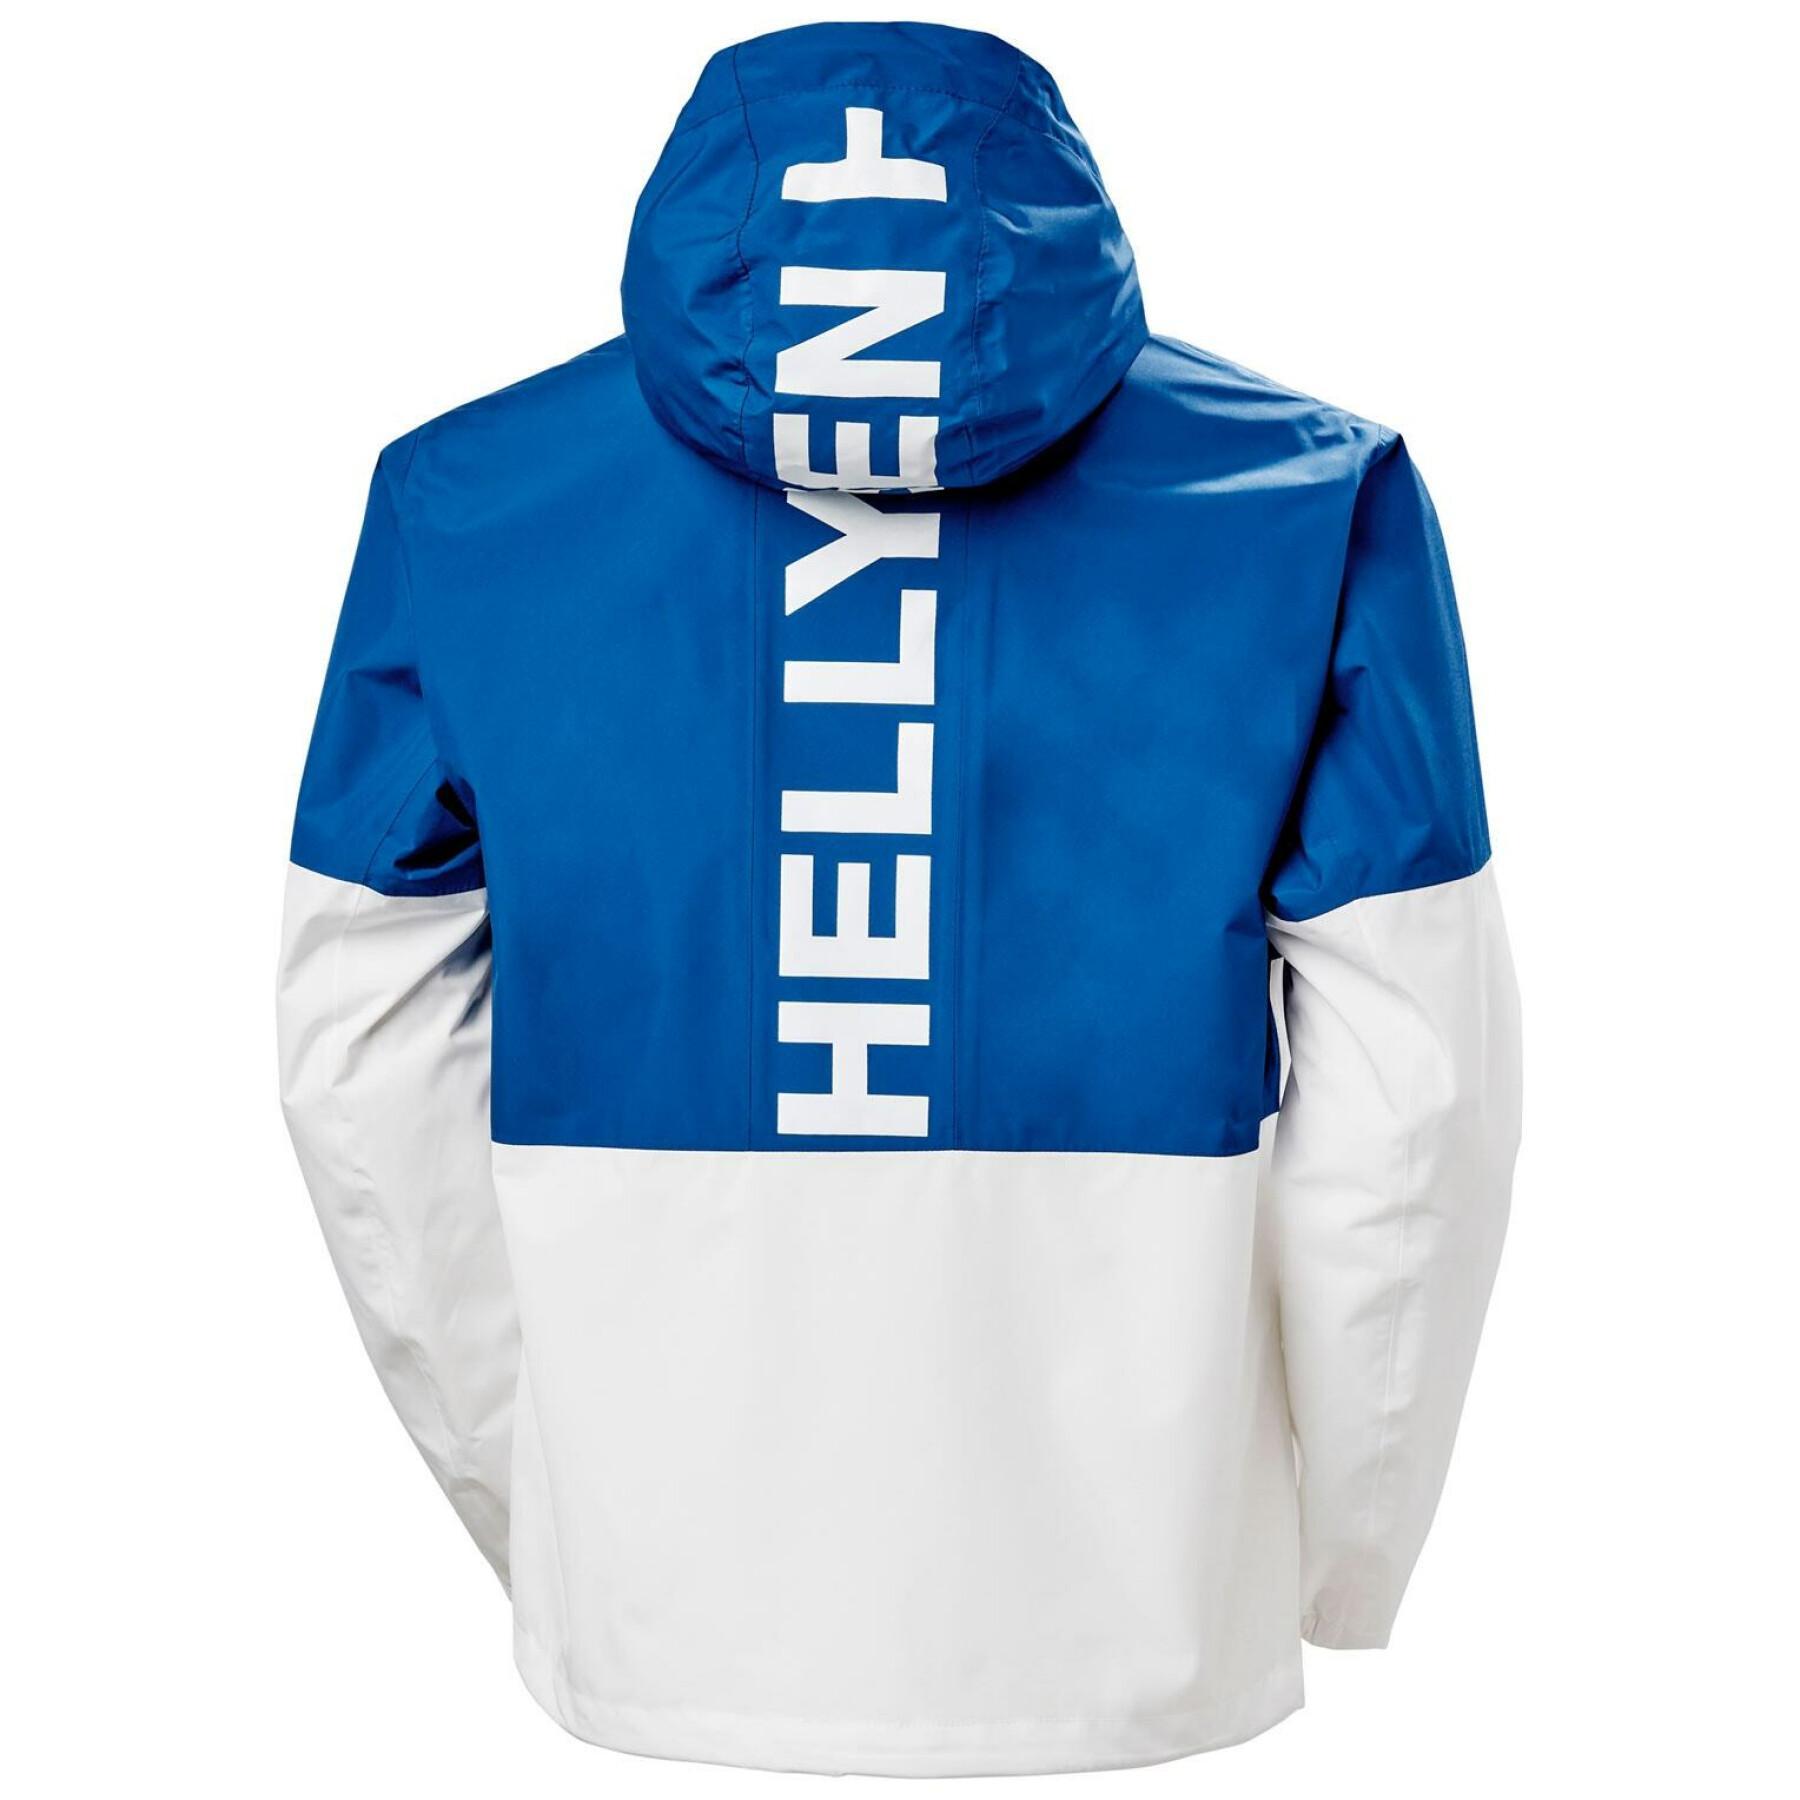 Giacca impermeabile Helly Hansen Pursuit